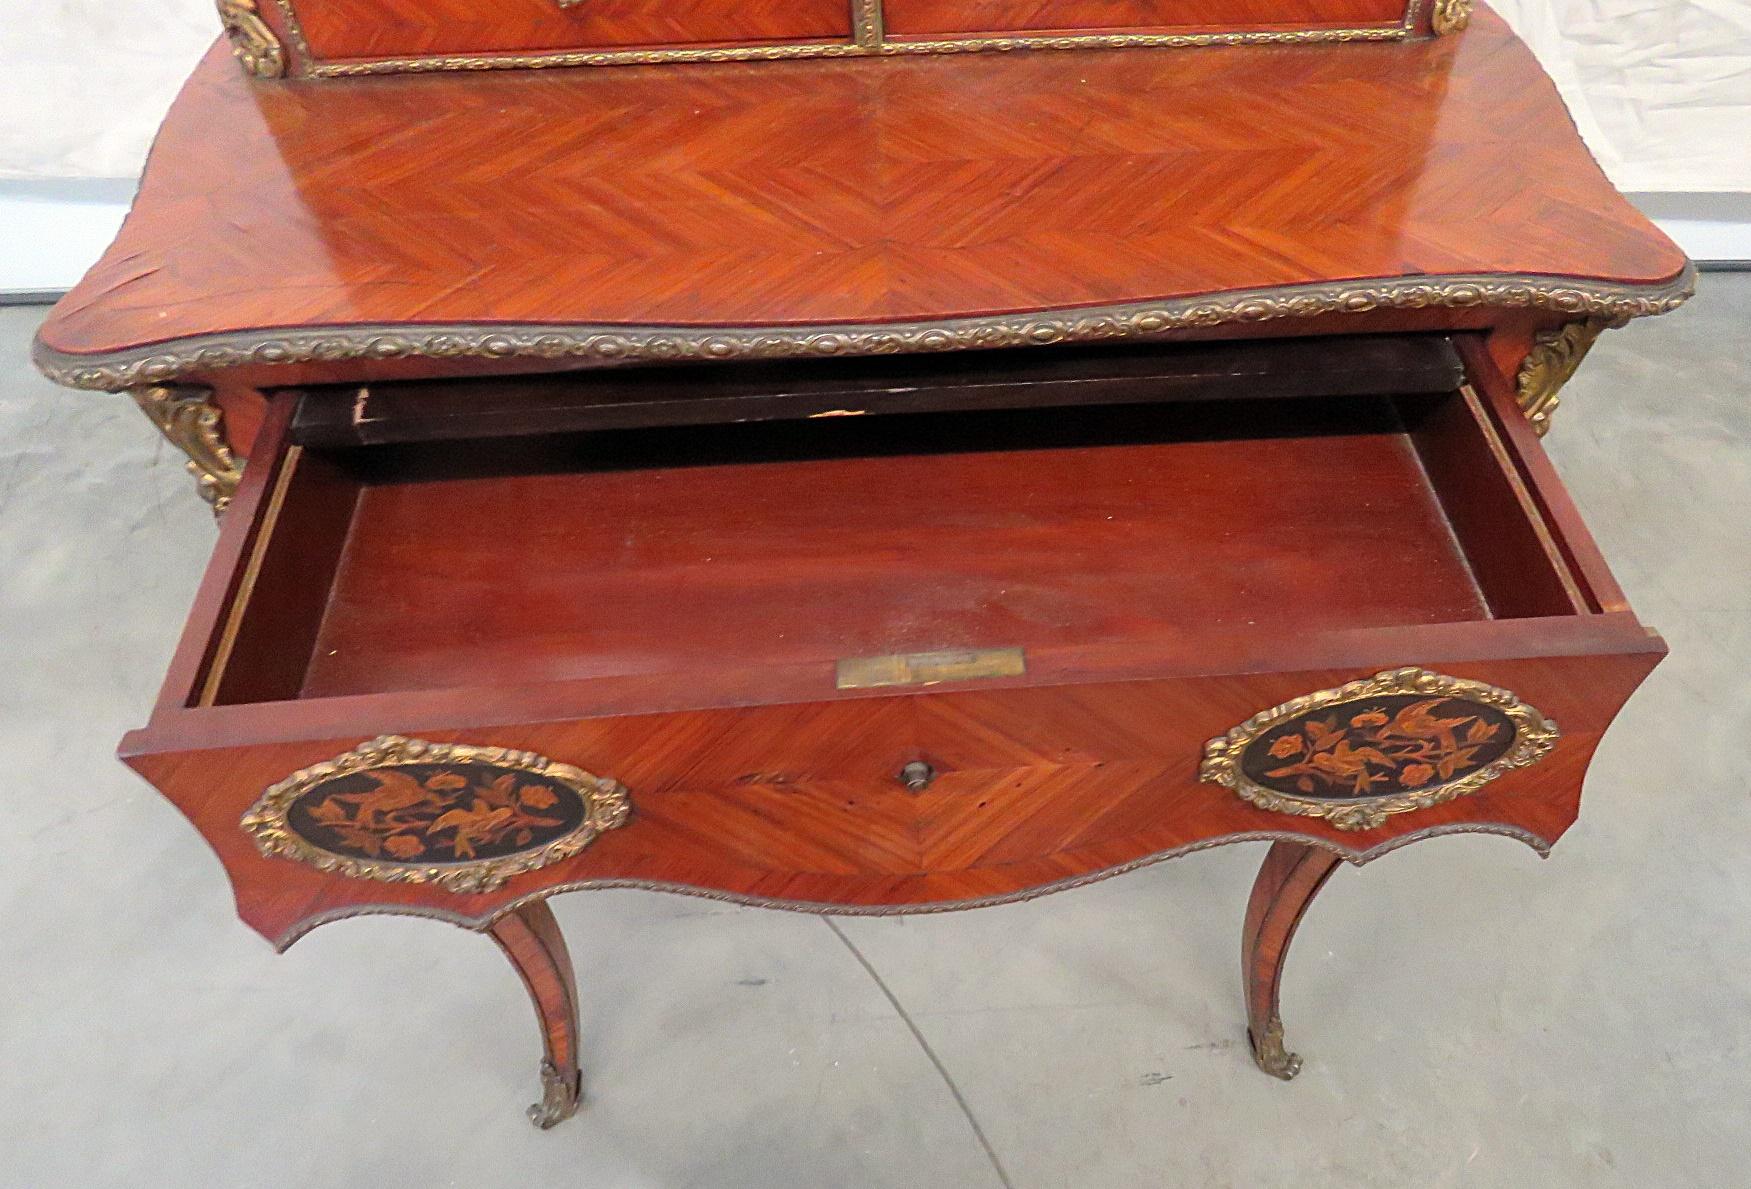 Antique C1870s French Louis XVI Style Inlaid King Wood Ladies Writing Desk 4